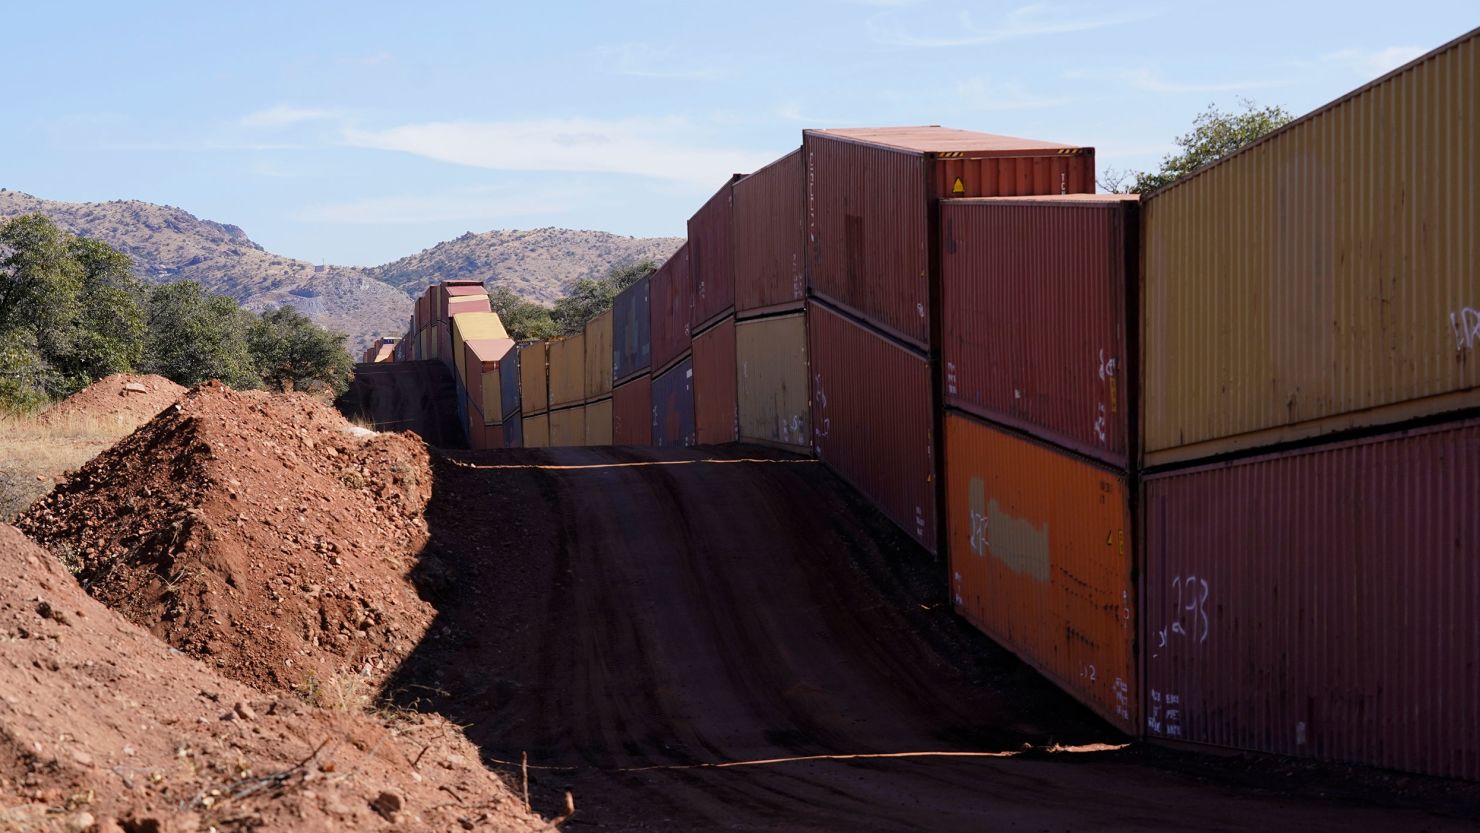 A long row of double-stacked shipping contrainers provide a new wall between the United States and Mexico in the remote section area of San Rafael Valley, Arizona, on December 8, 2022.